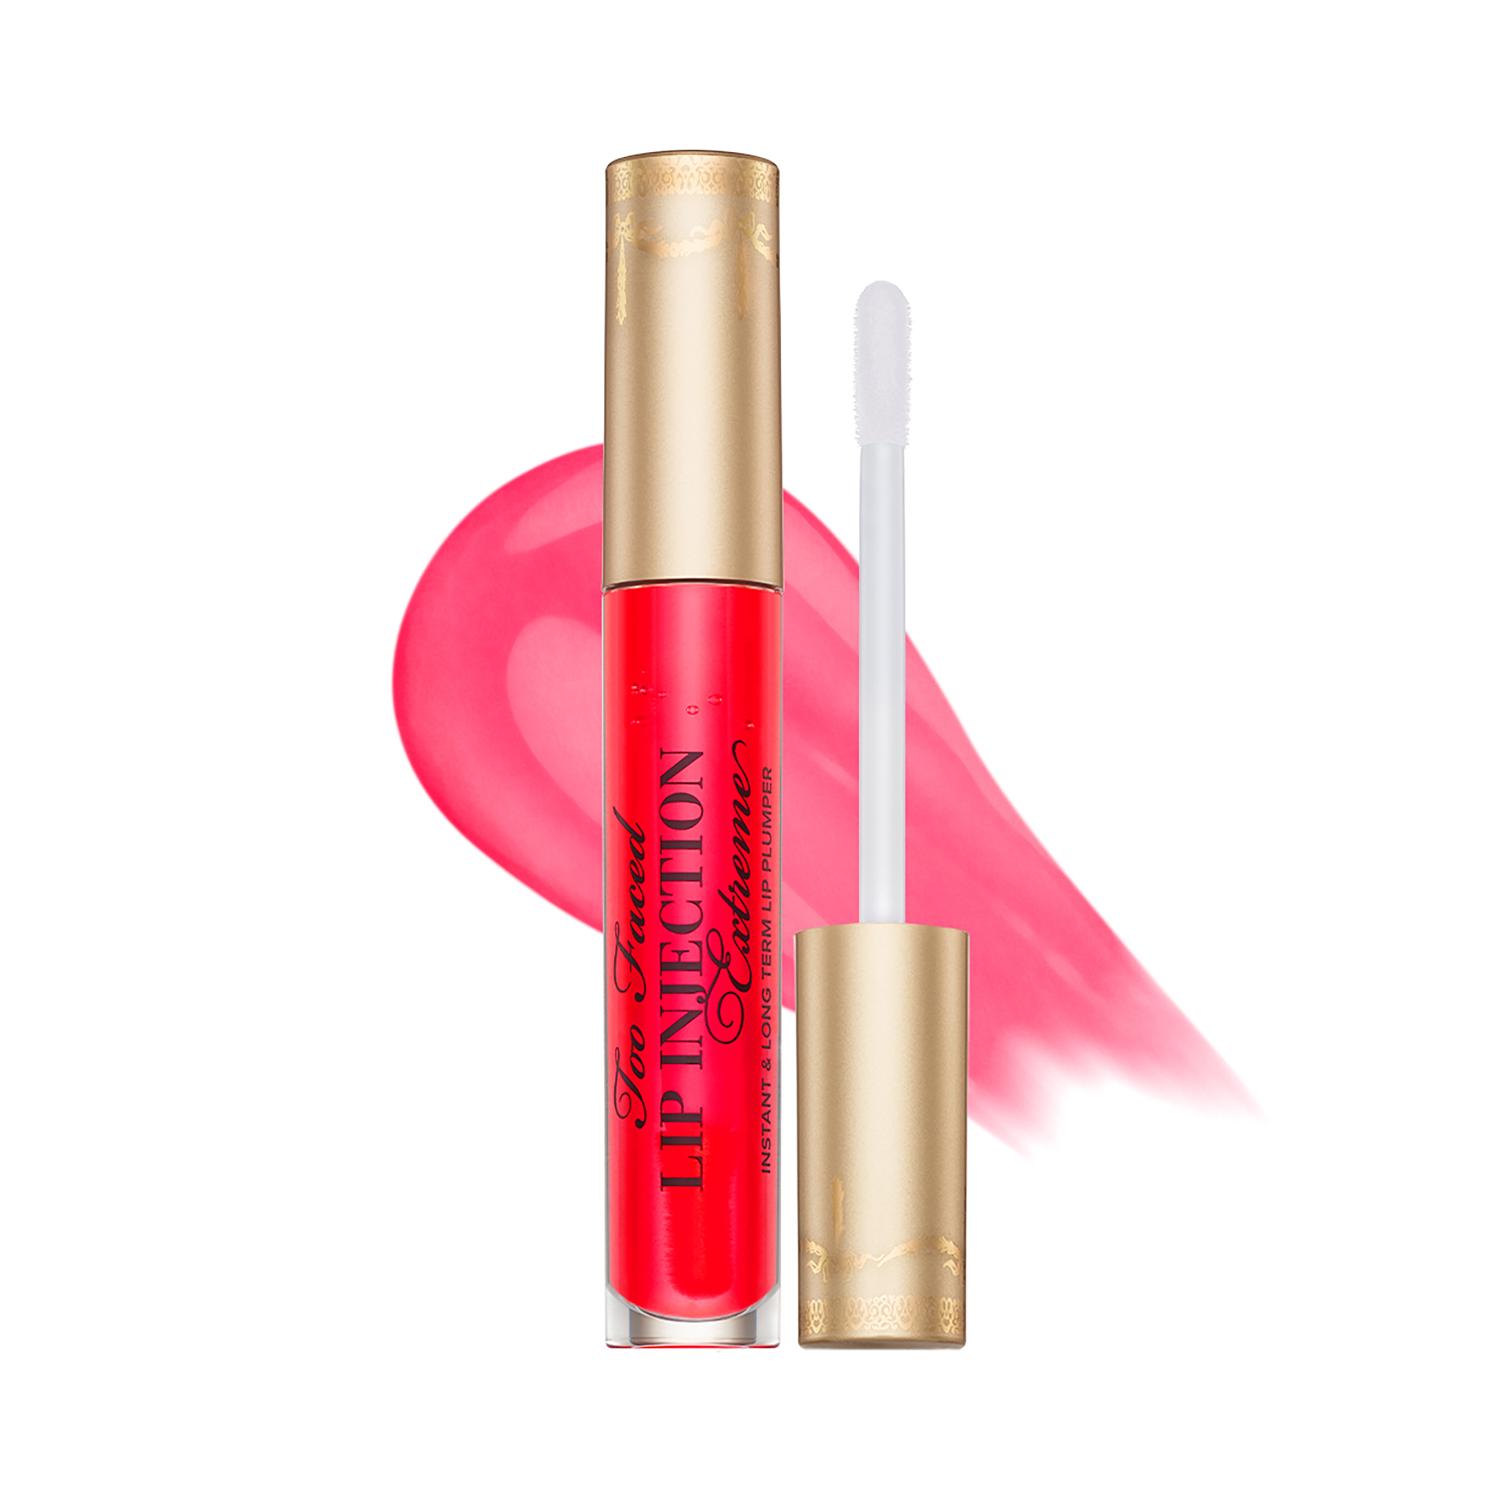 Too Faced | Too Faced Lip Injection Plumping Lip Gloss -  Strawberry Kiss (4g)